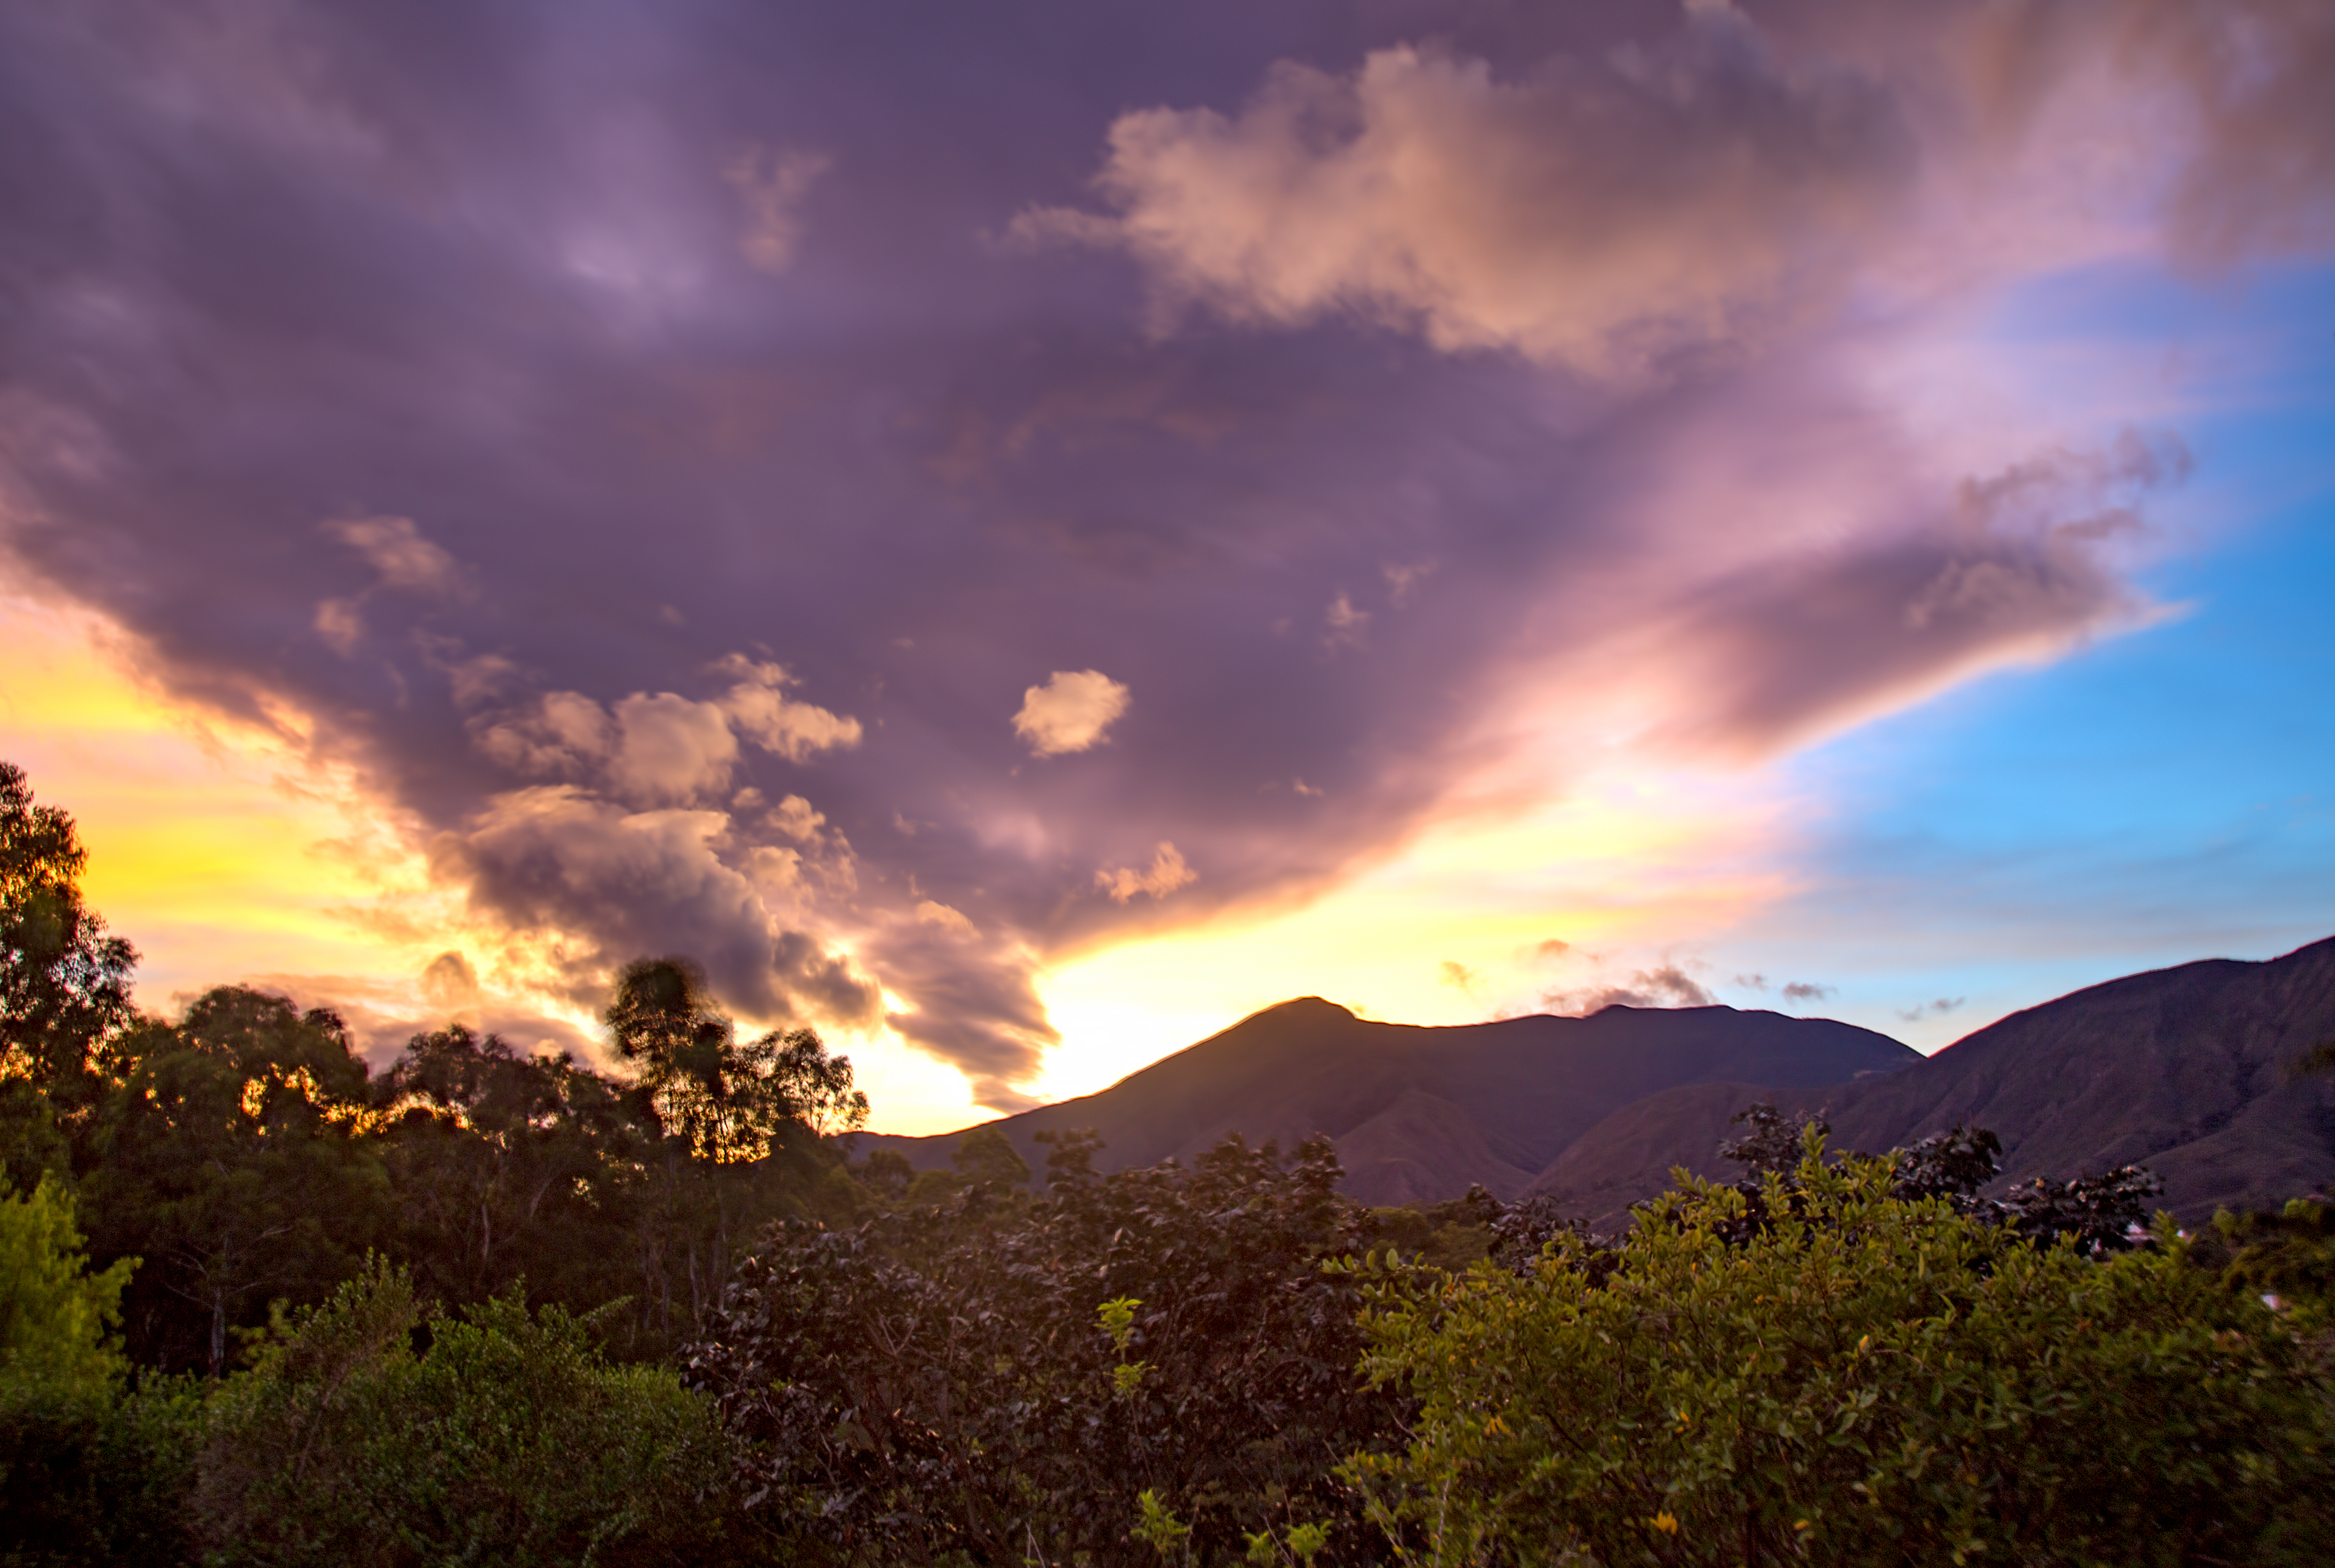 The first sun beams lighting the cluds over Iguaque mountain.jpg